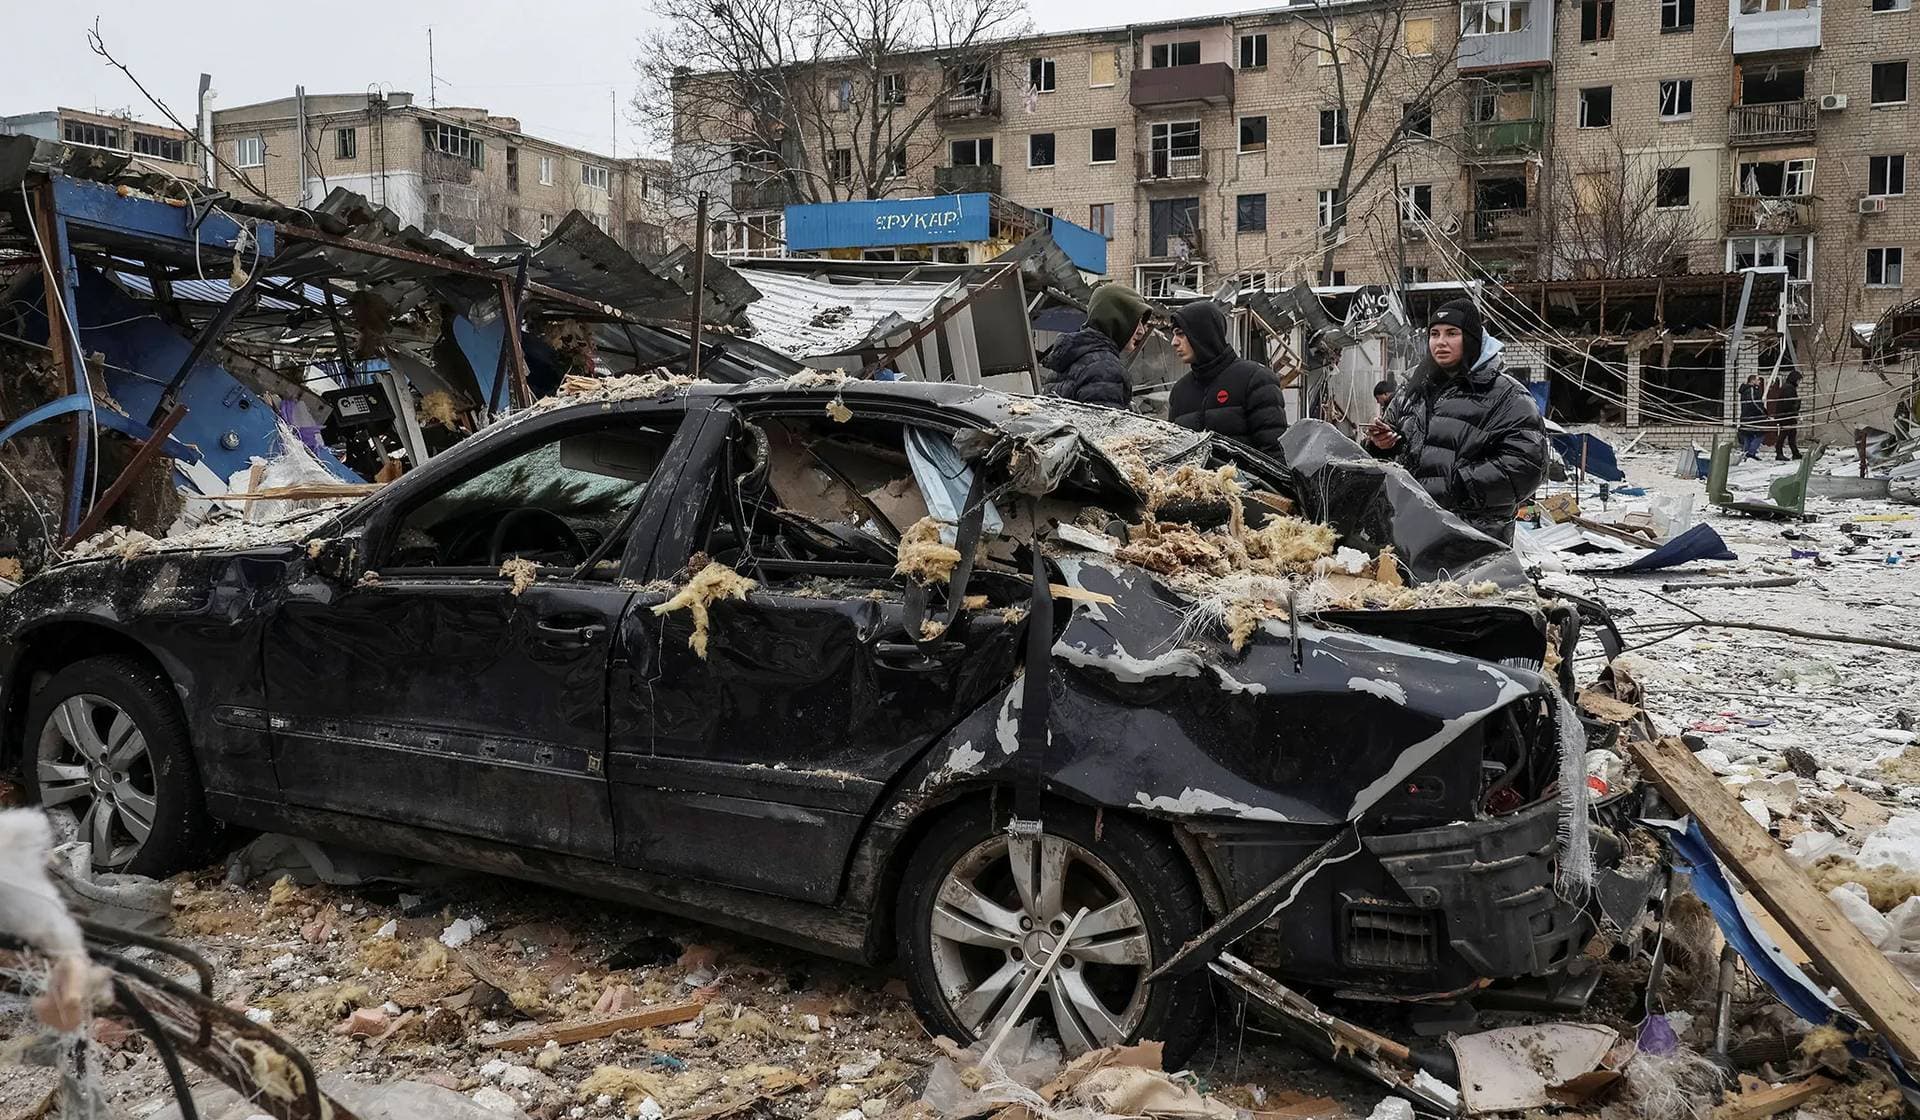 Local residents stand near a destroyed car at a site of apartment building damaged during a Russian missile strike in Kharkiv